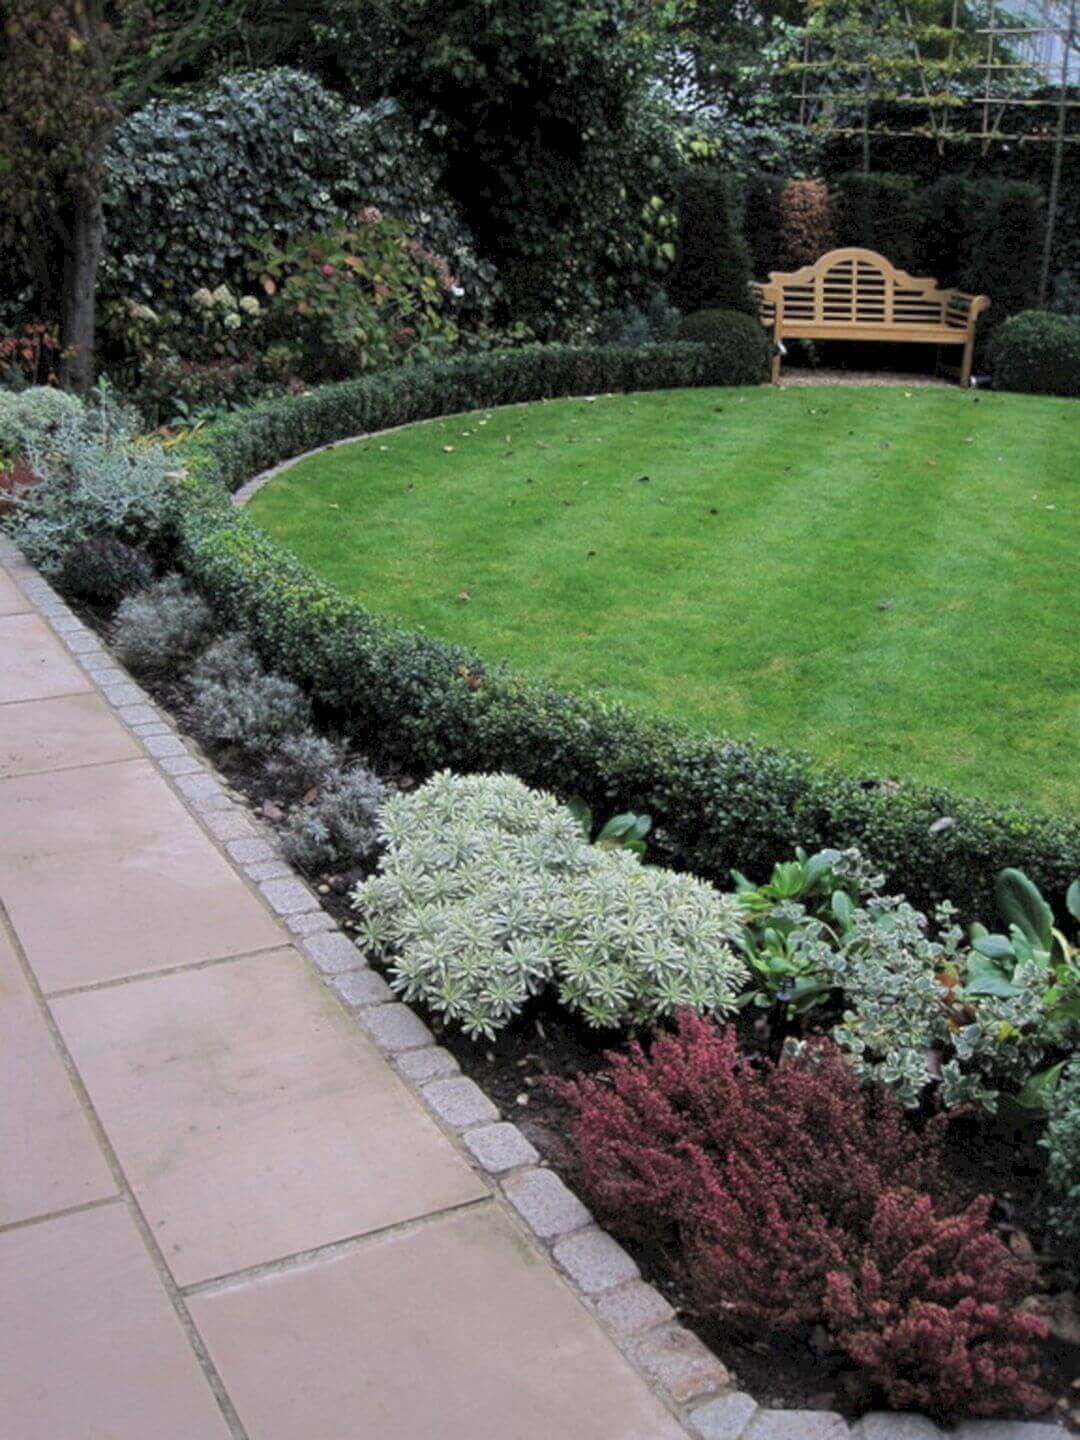 Lawn edging designs may sound like a boring topic, you will see there are some creative and interesting ideas you can put into practice to give a nicer look to your house’s landscape. For more ideas go to backyardmastery.com